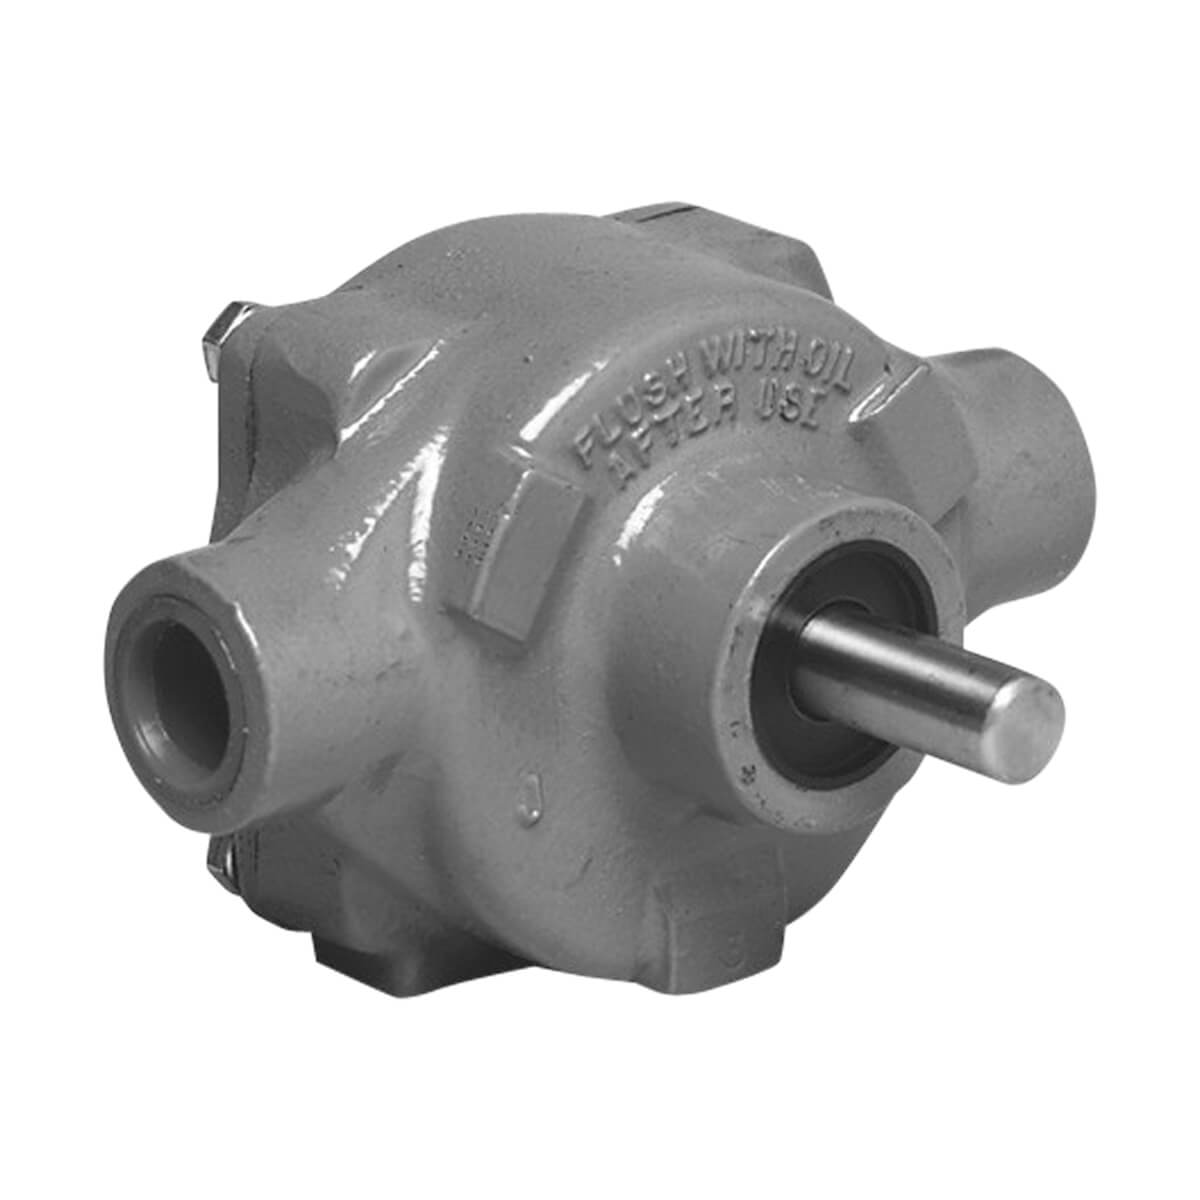 Hypro Roller Pumps - 400IC